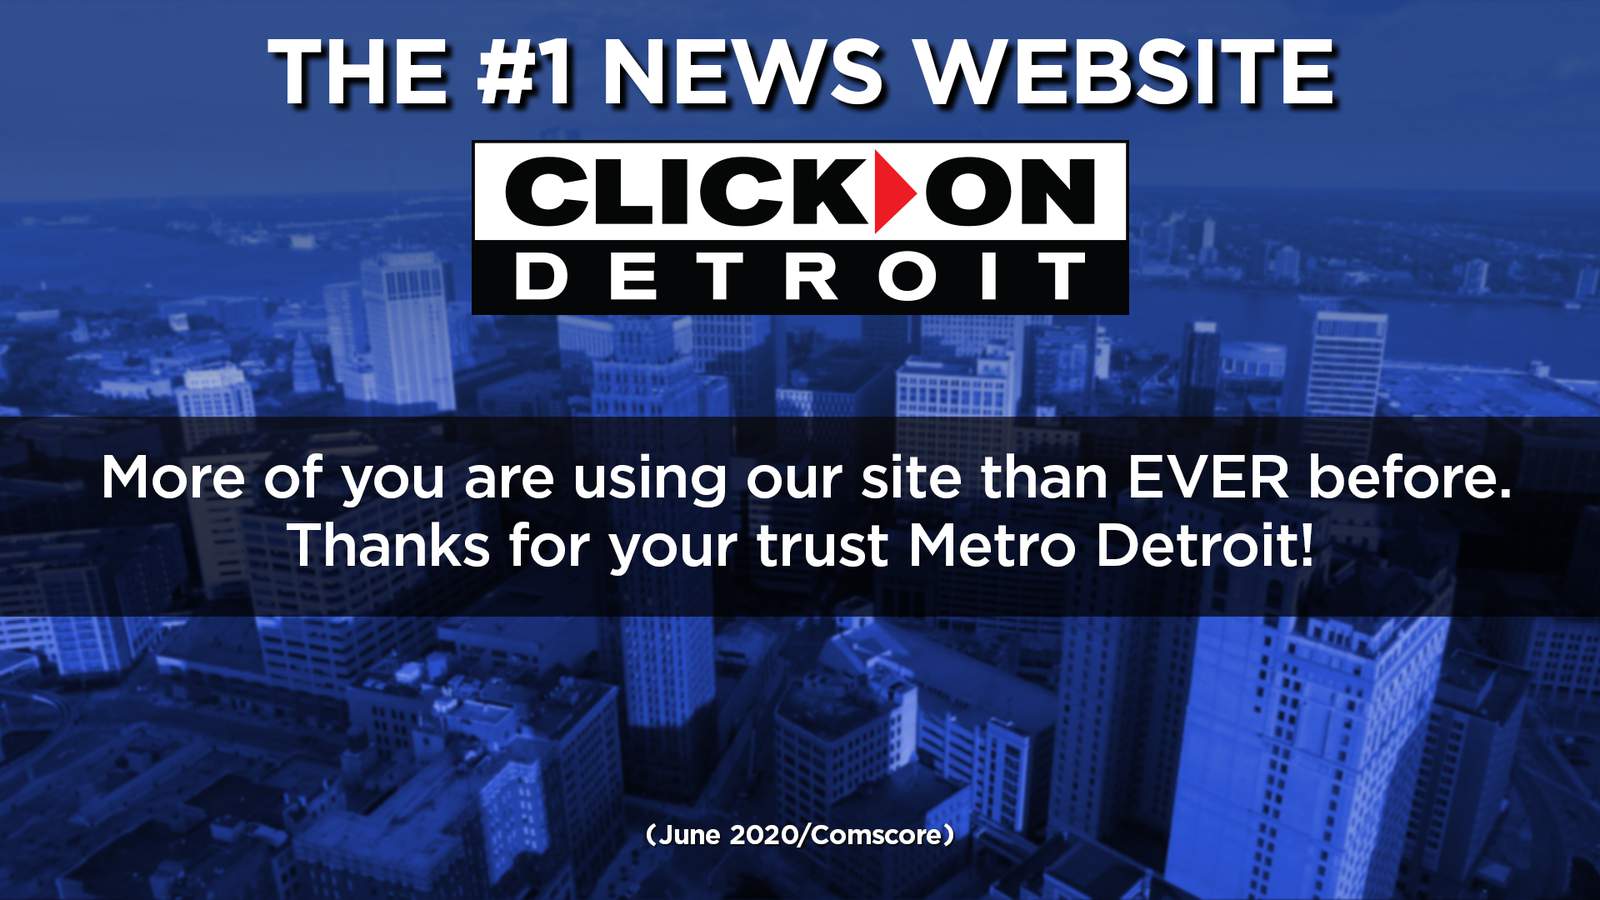 ClickOnDetroit: No. 1 news website 6 months in a row